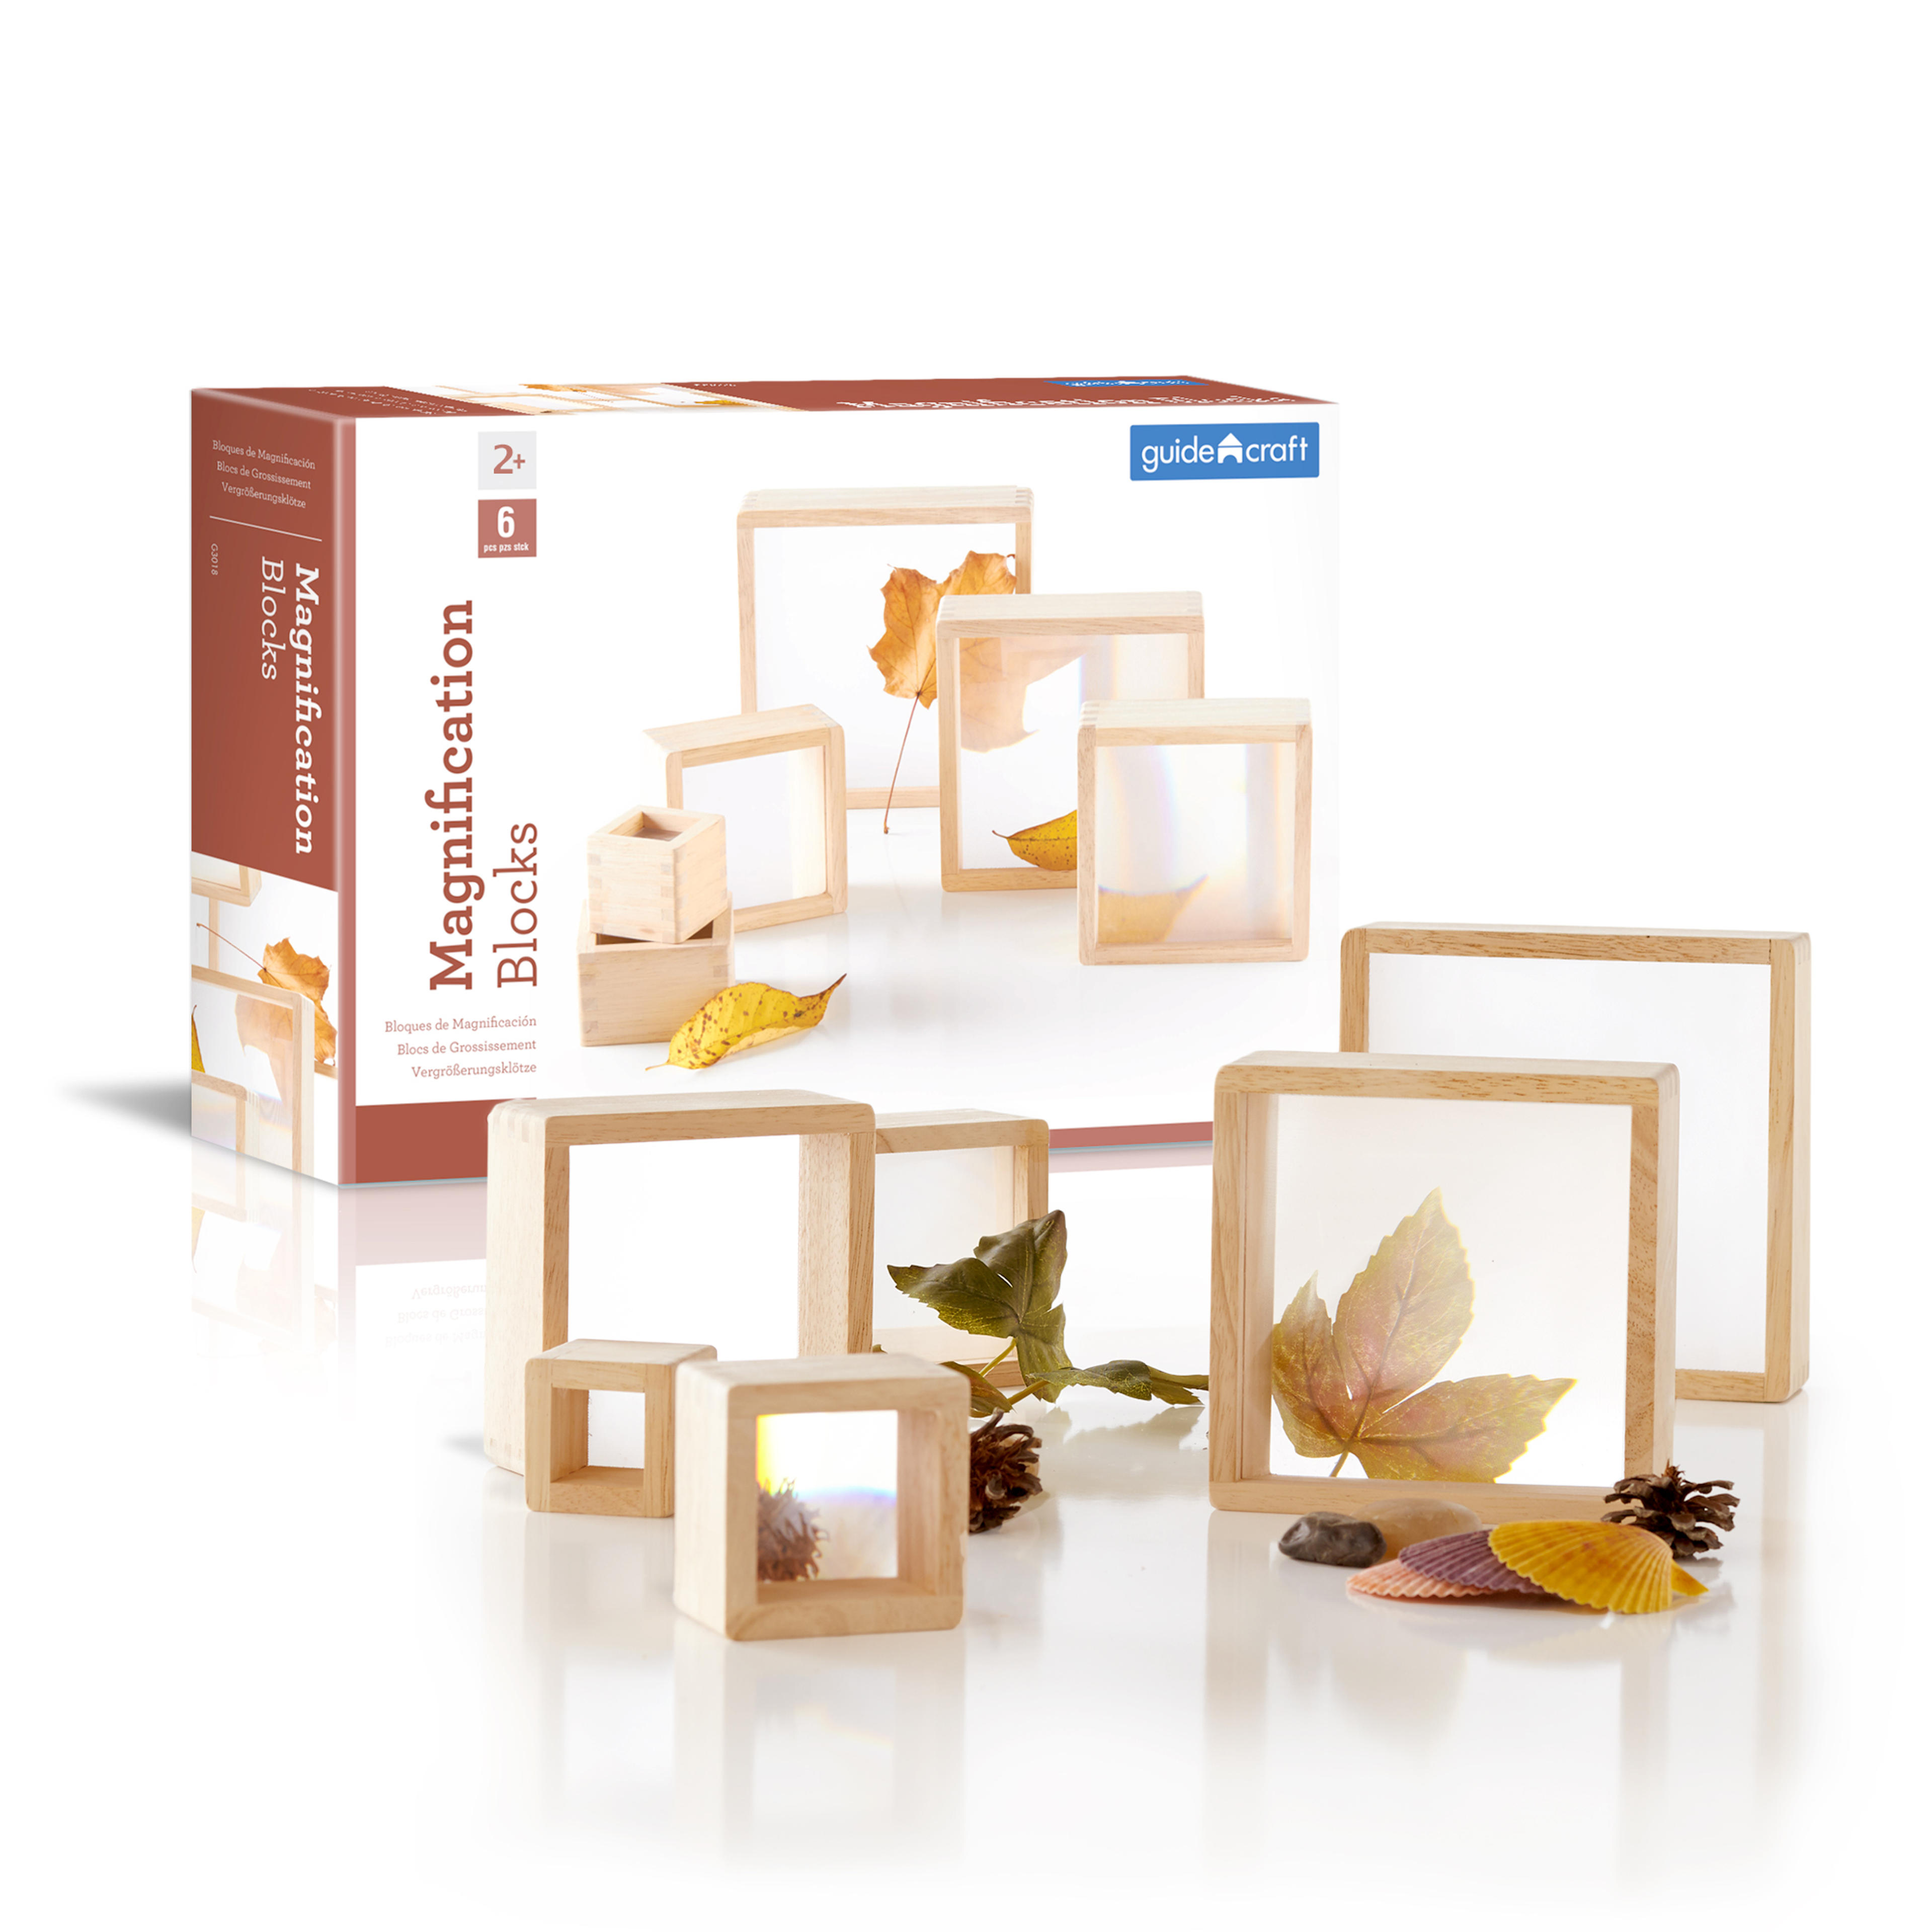 Magnification Blocks - Guidecraft Kids’ Furniture and Toys